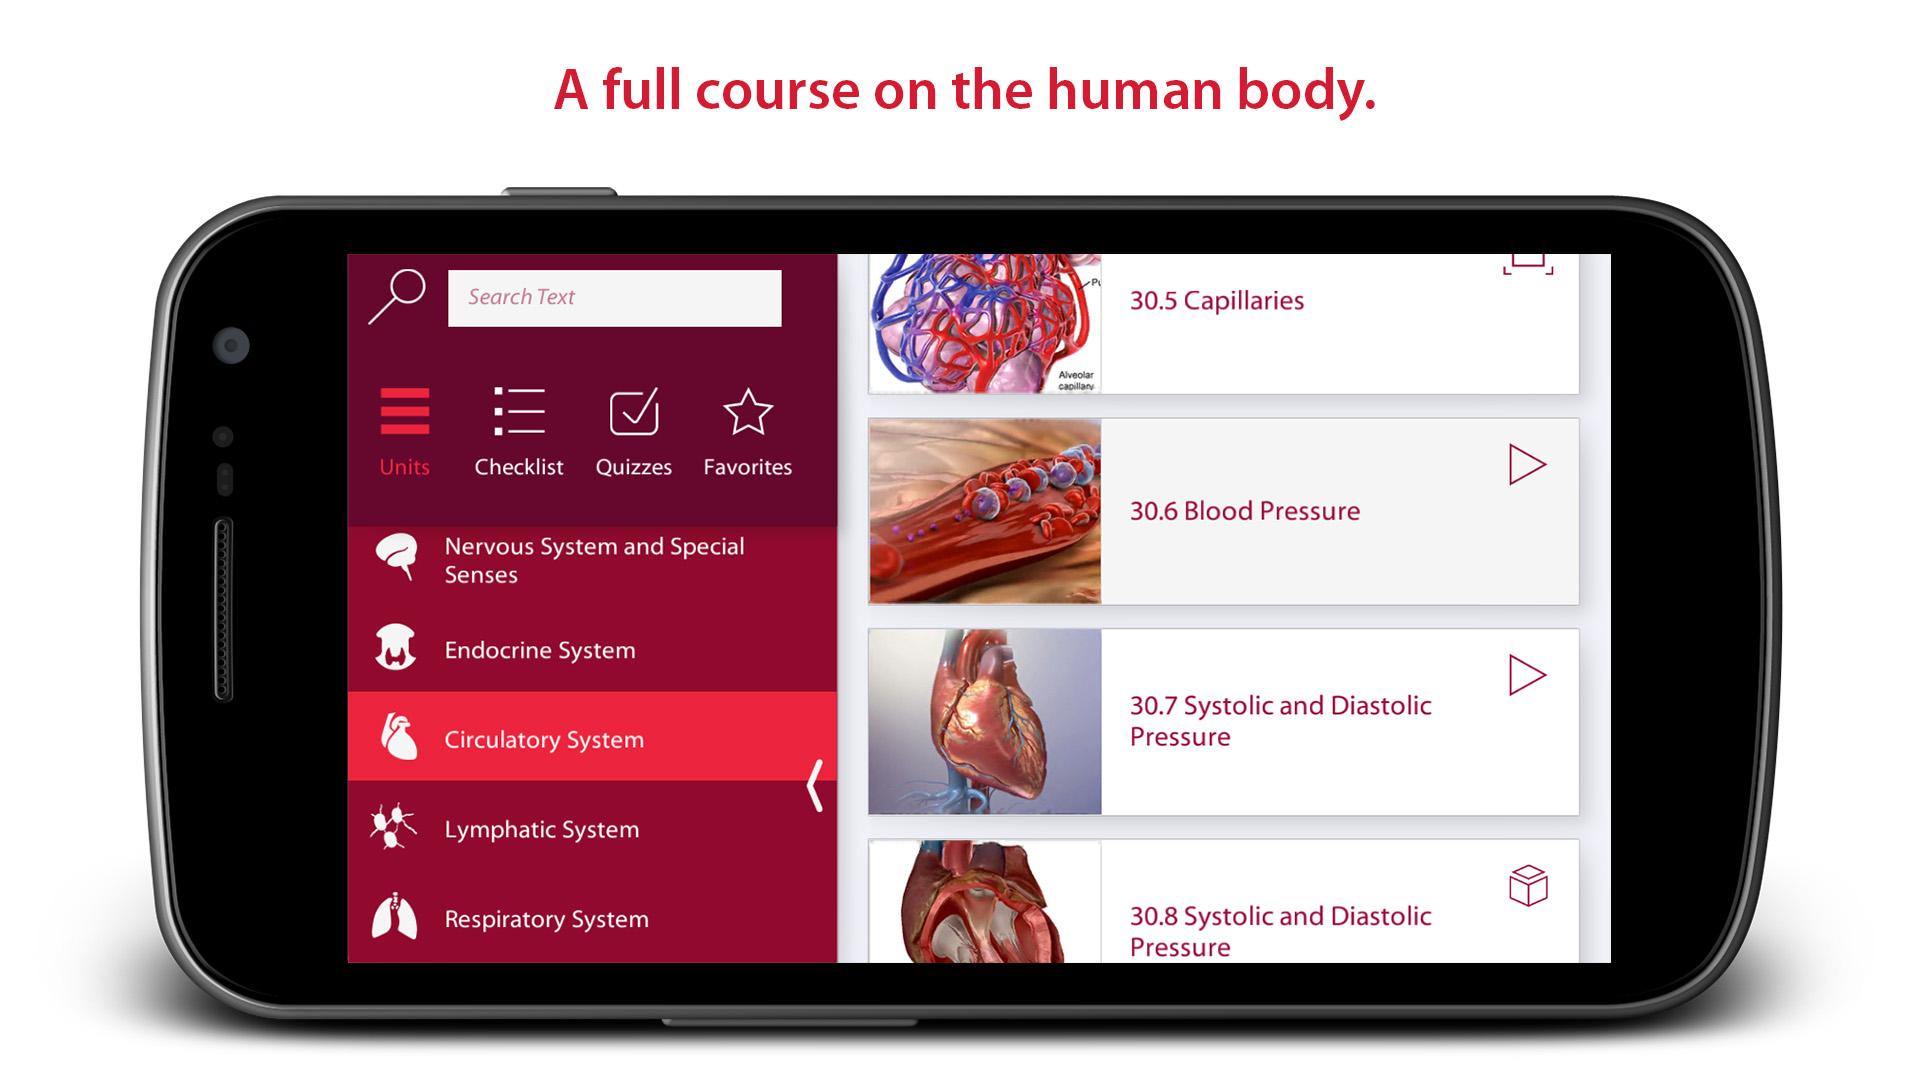 Android application Anatomy & Physiology screenshort